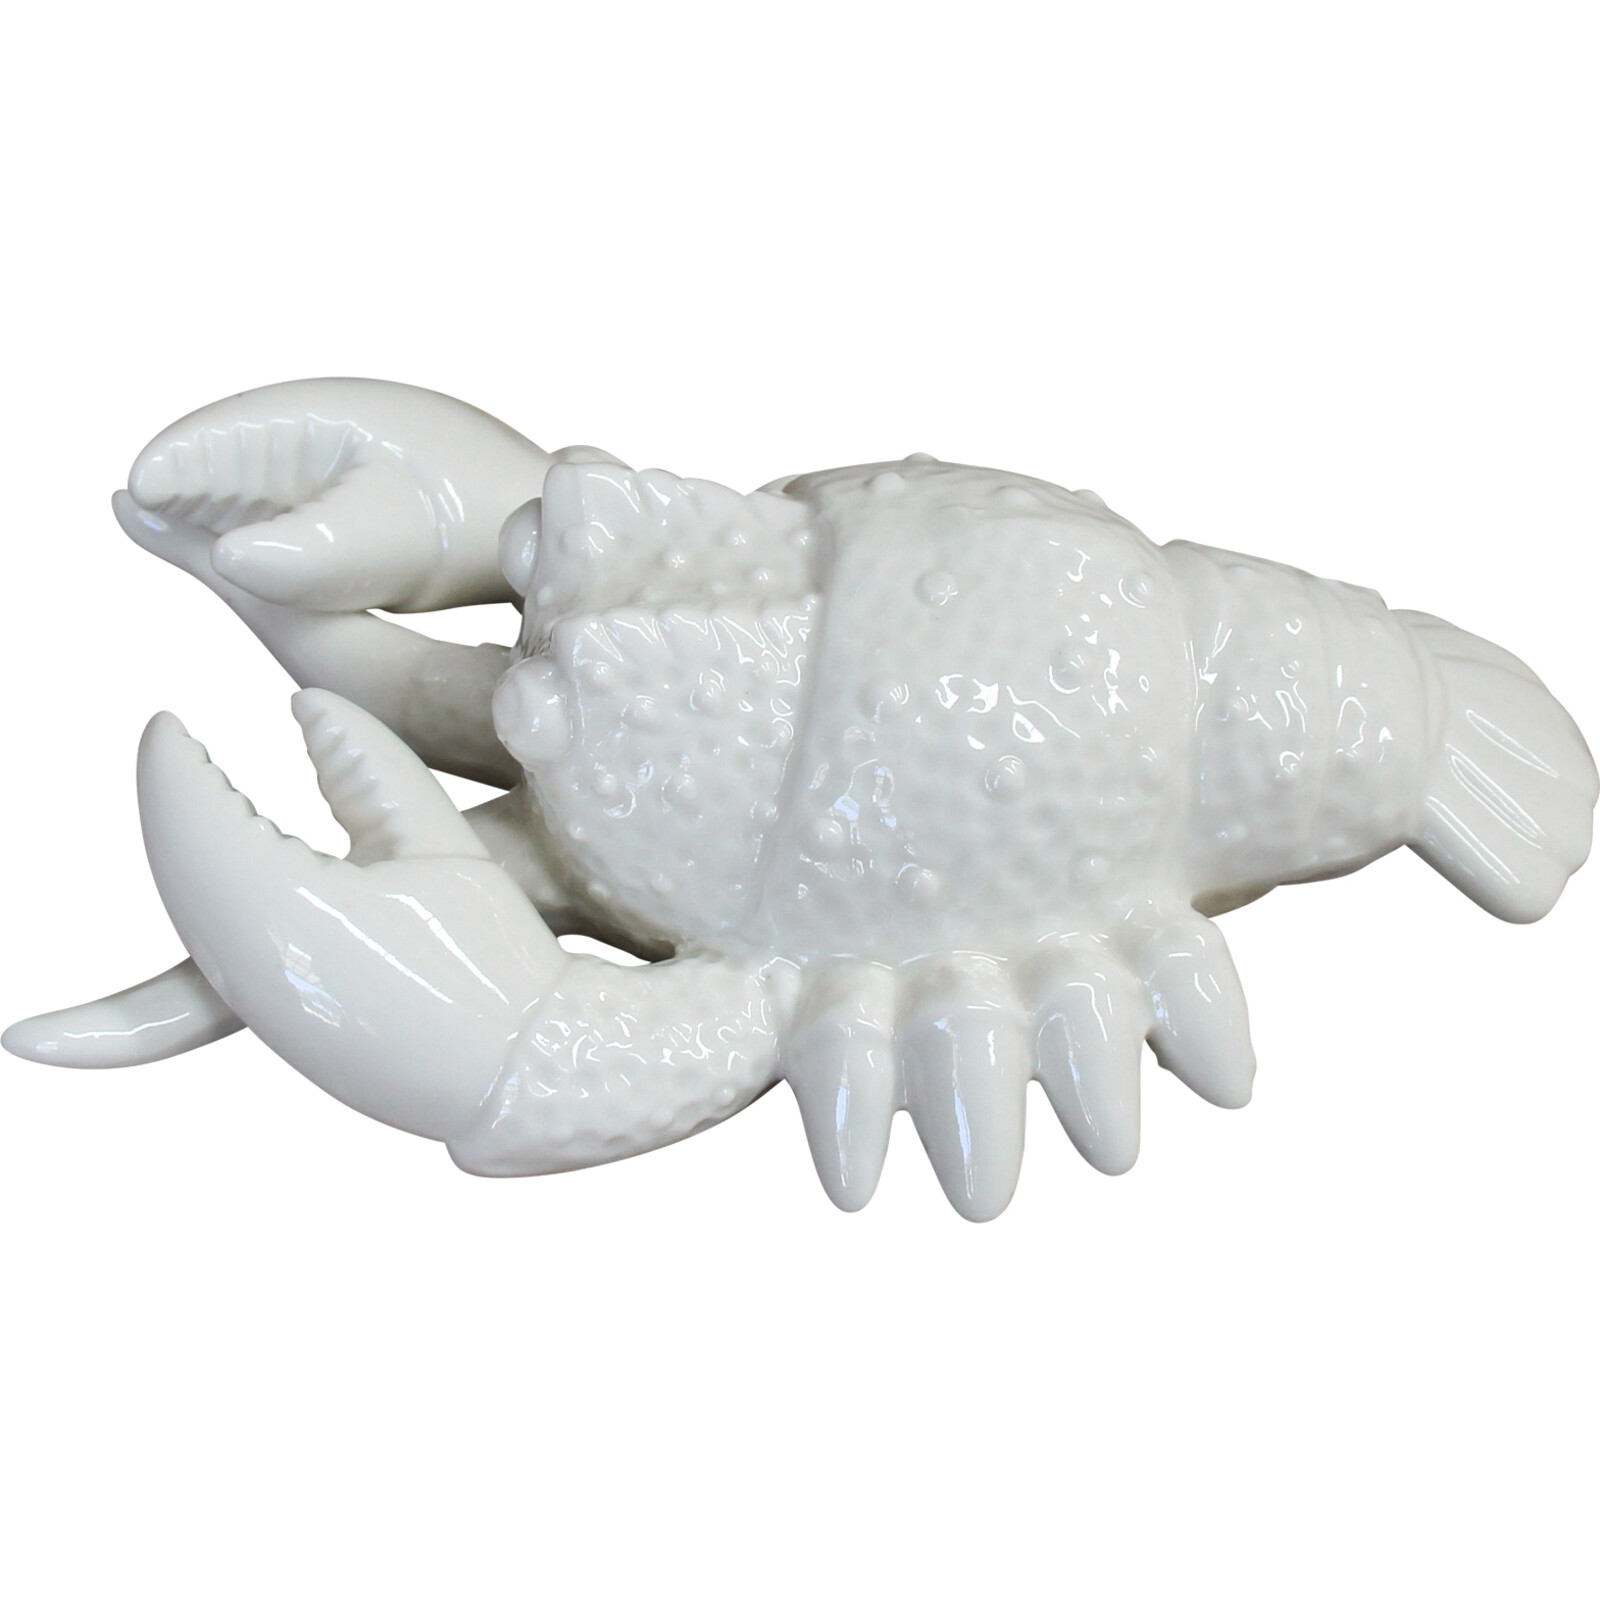 Lobster Decor Snappy White